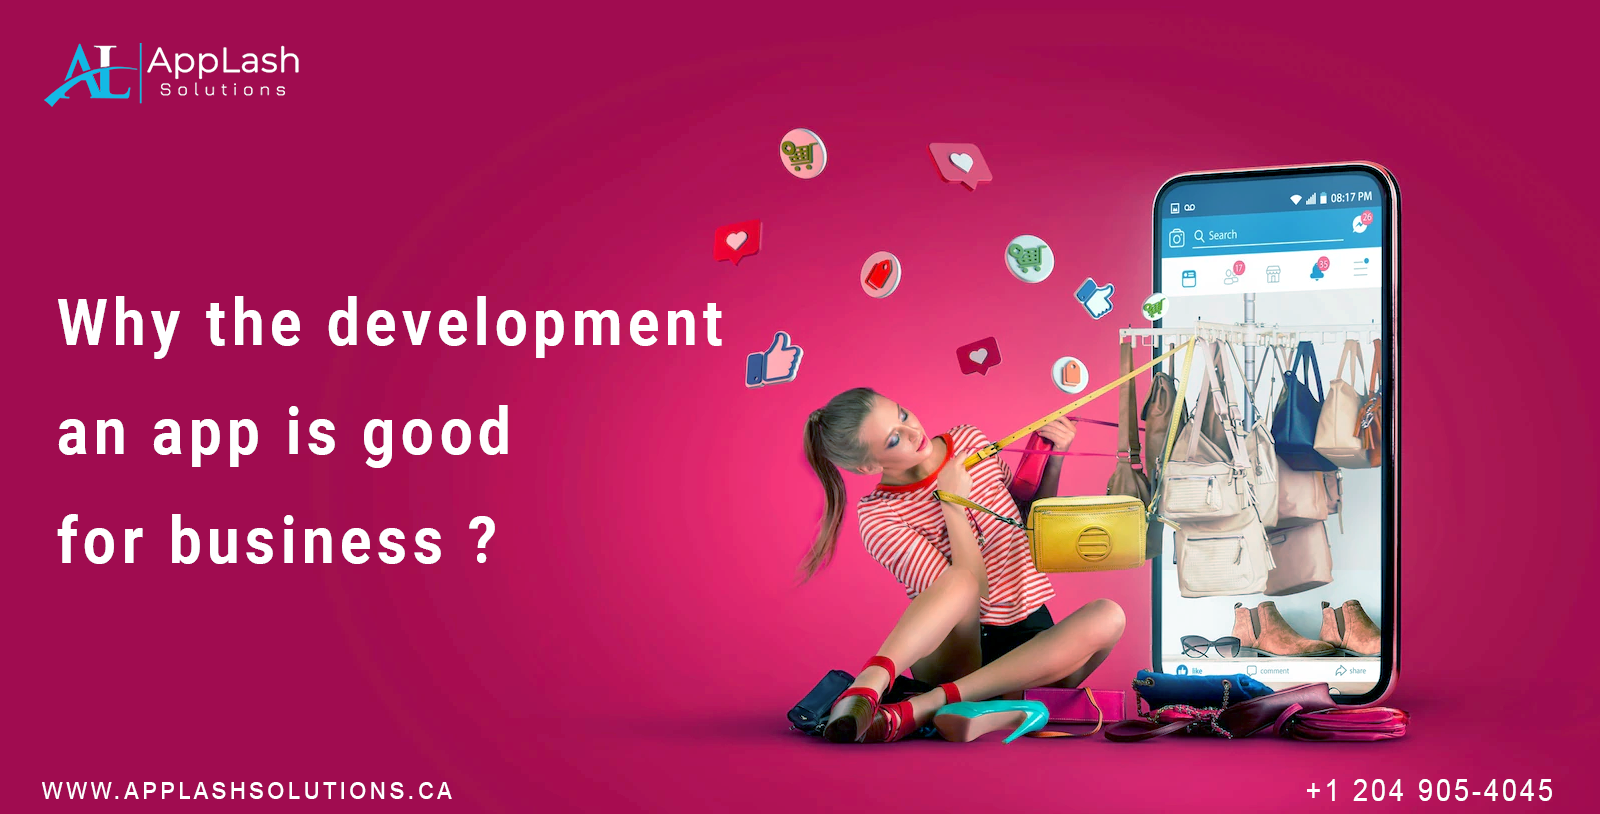 Why the development an app is good for business?